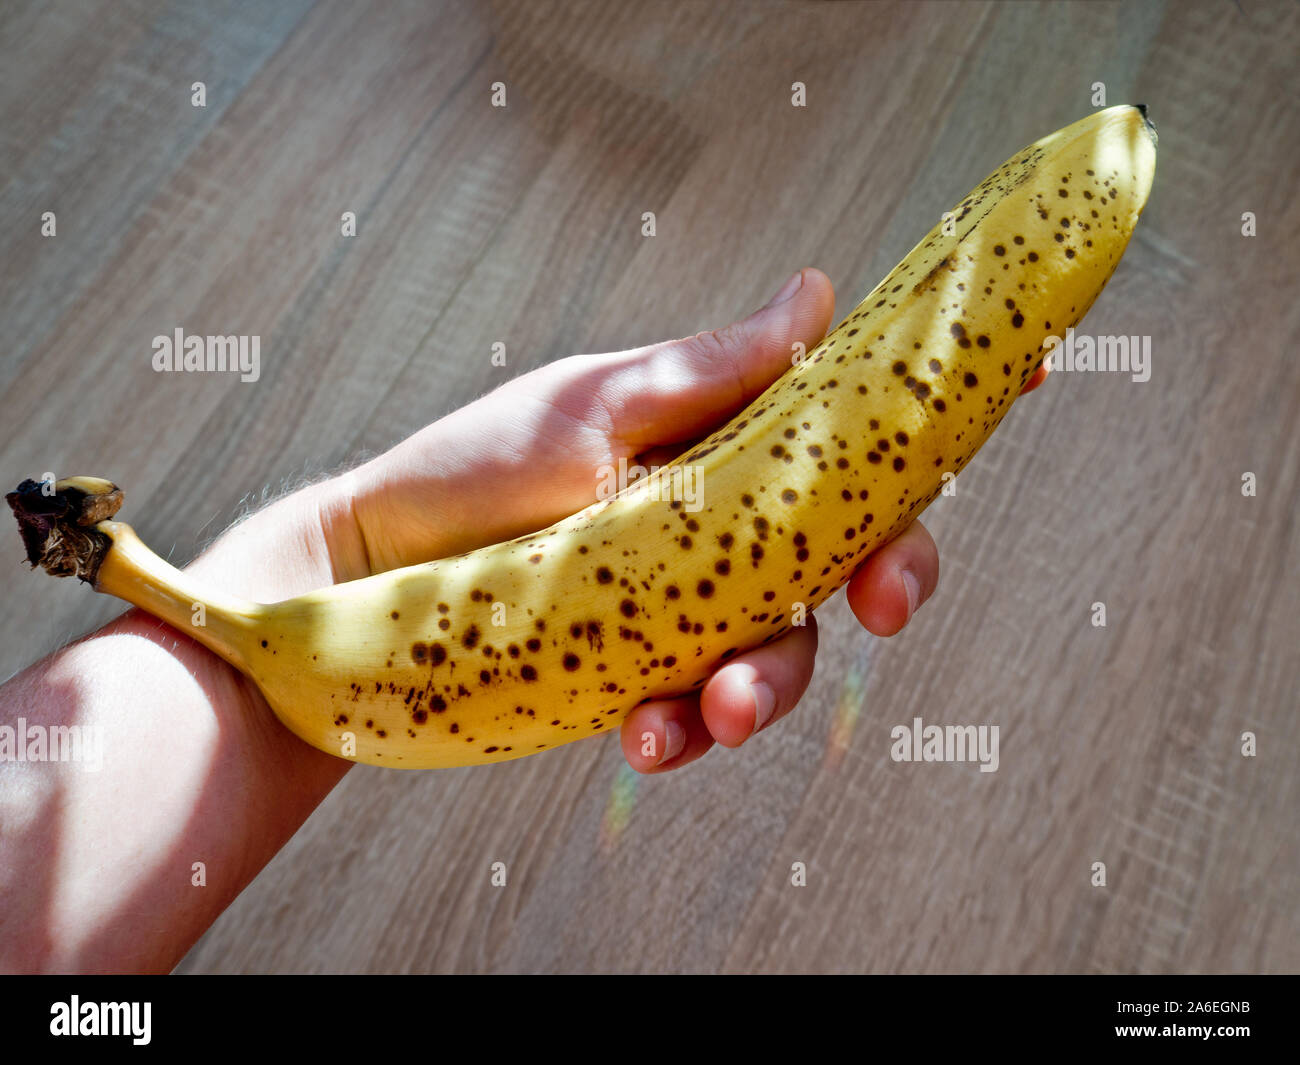 A ripe banana in the hand with wooden background. Stock Photo